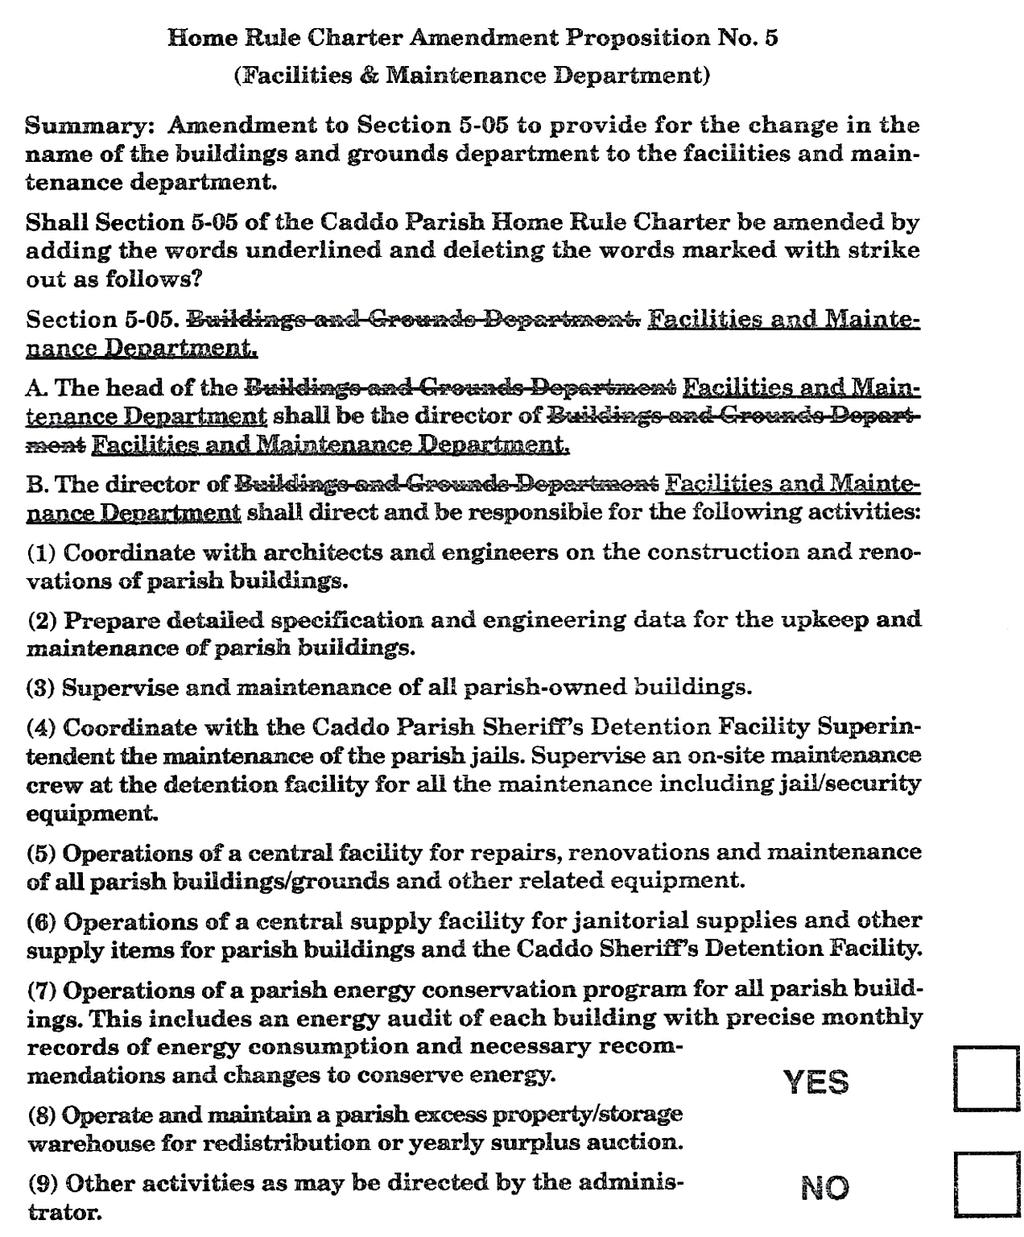 Charts show Caddo Parish results only. Home Rule Charter Amendment Proposition #5 PW- HRC #05 -- Prop.